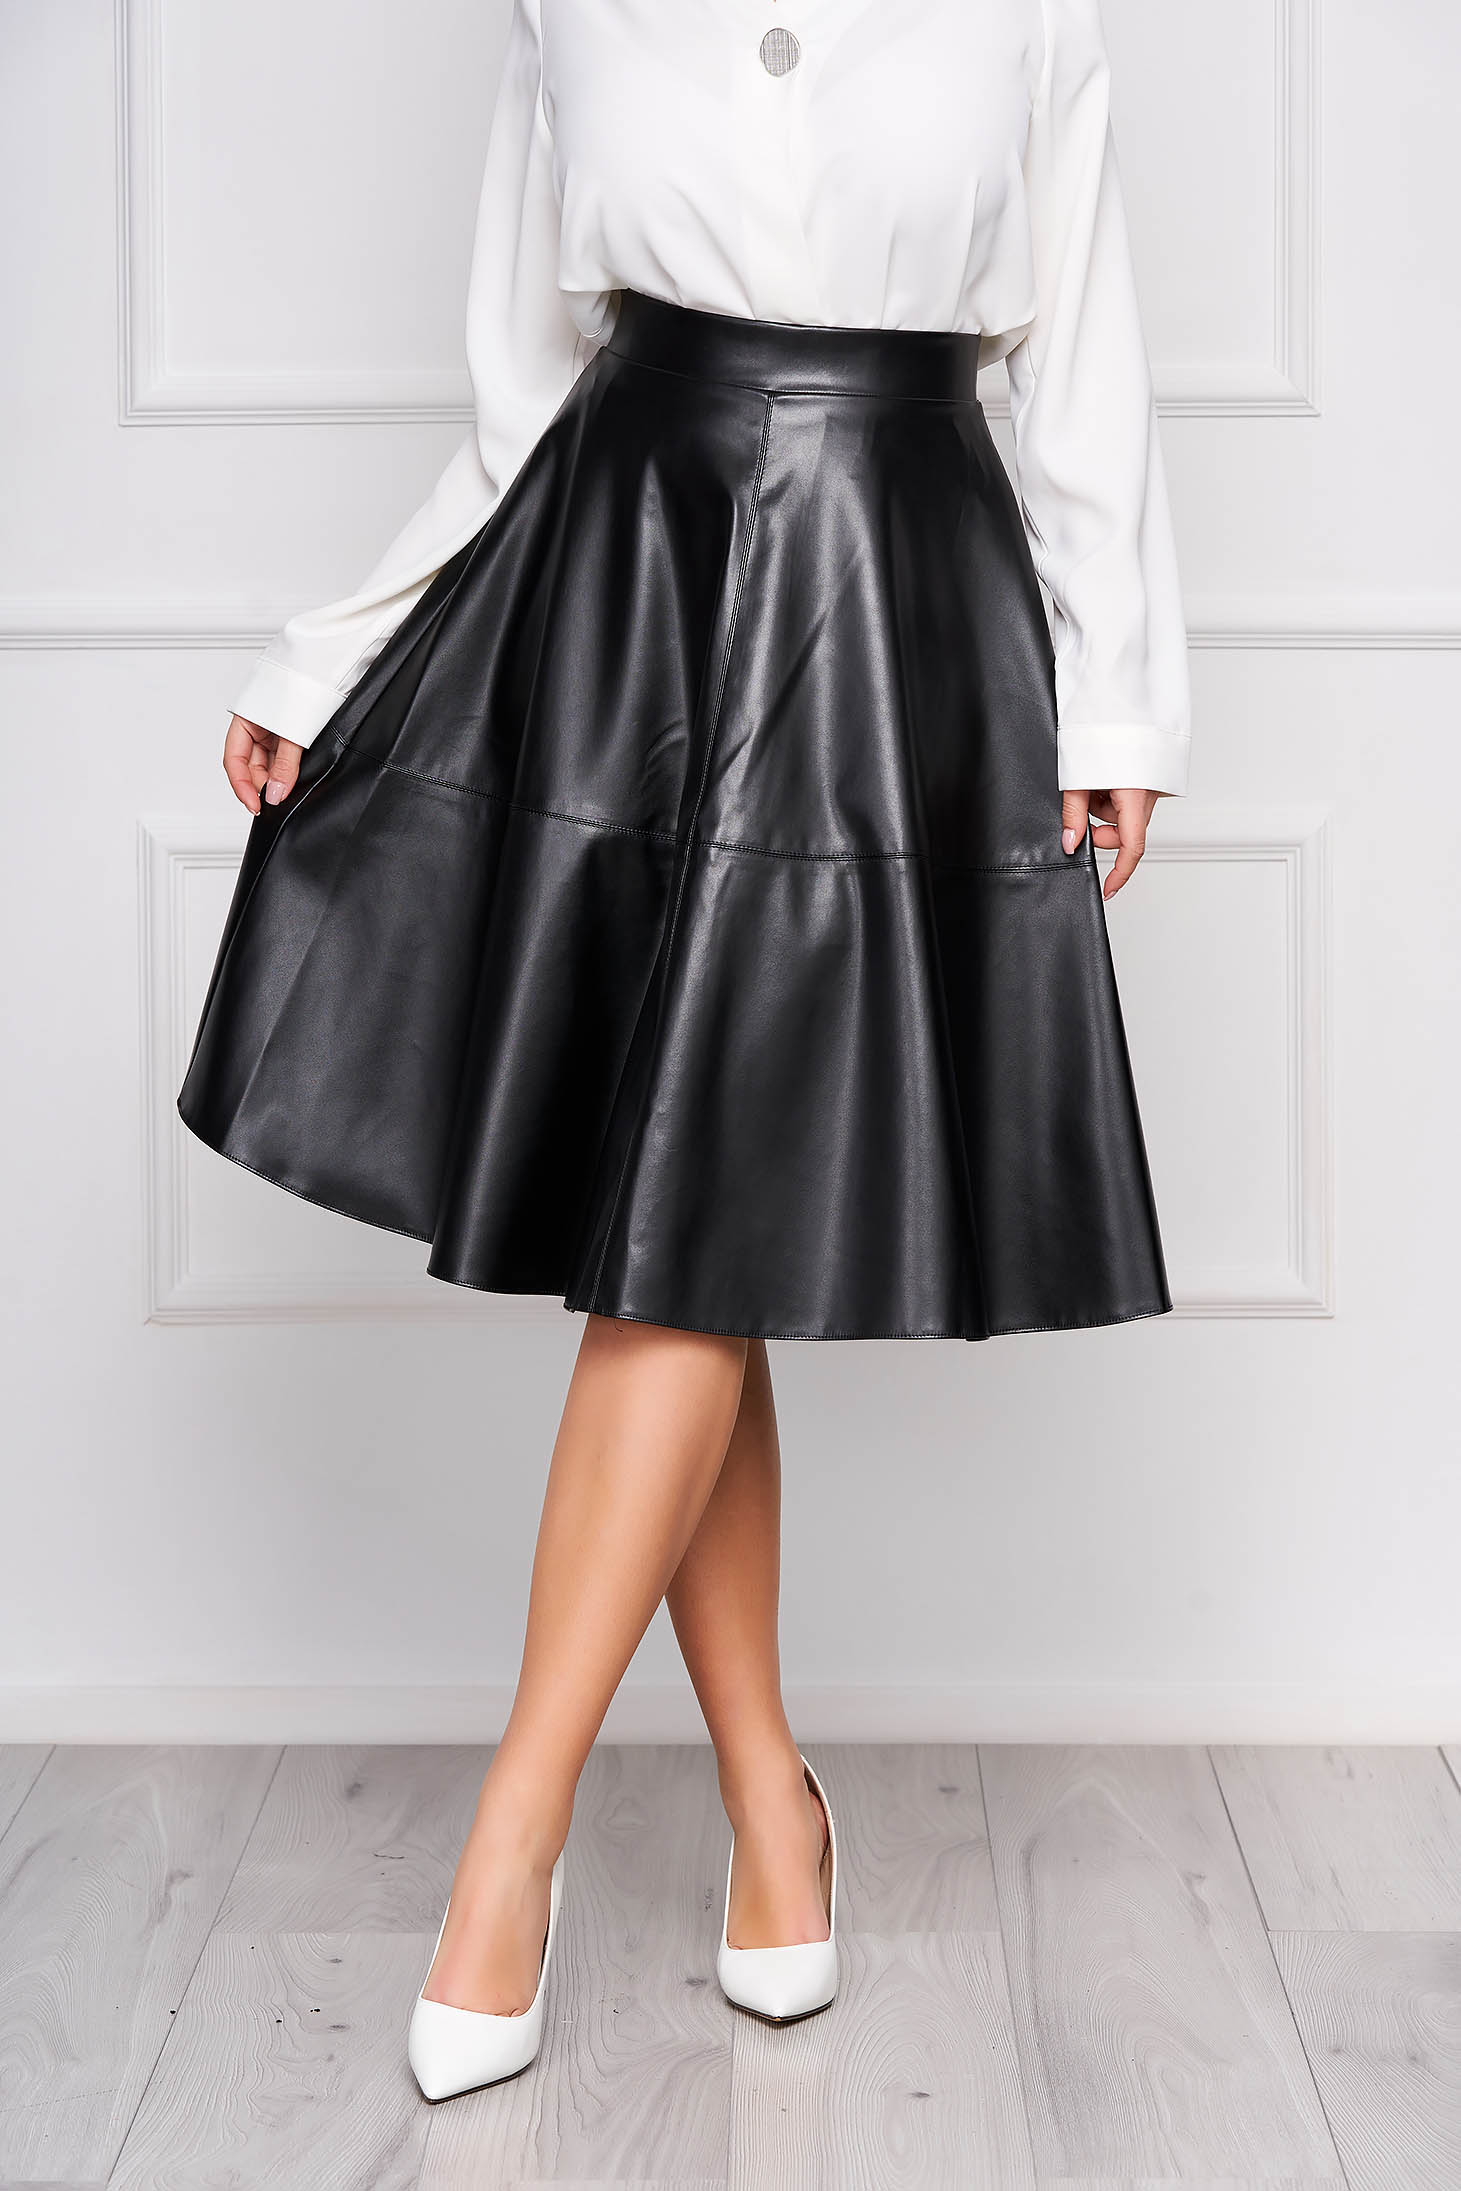 Starshiners Black Casual Cloche High Waisted Skirt From Ecological Leather 1605